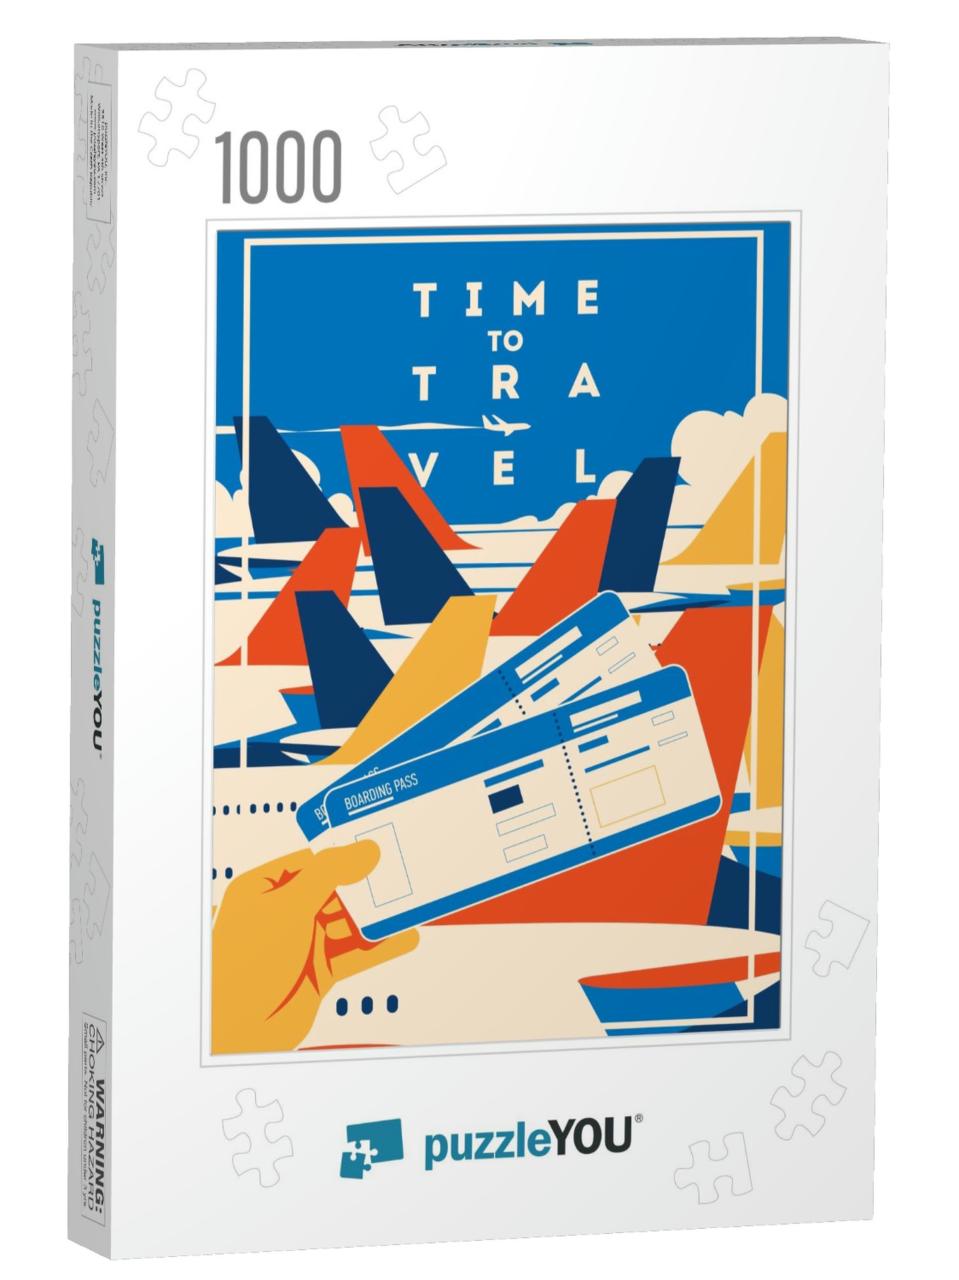 Time to Travel & Airport Vacation Poster... Jigsaw Puzzle with 1000 pieces